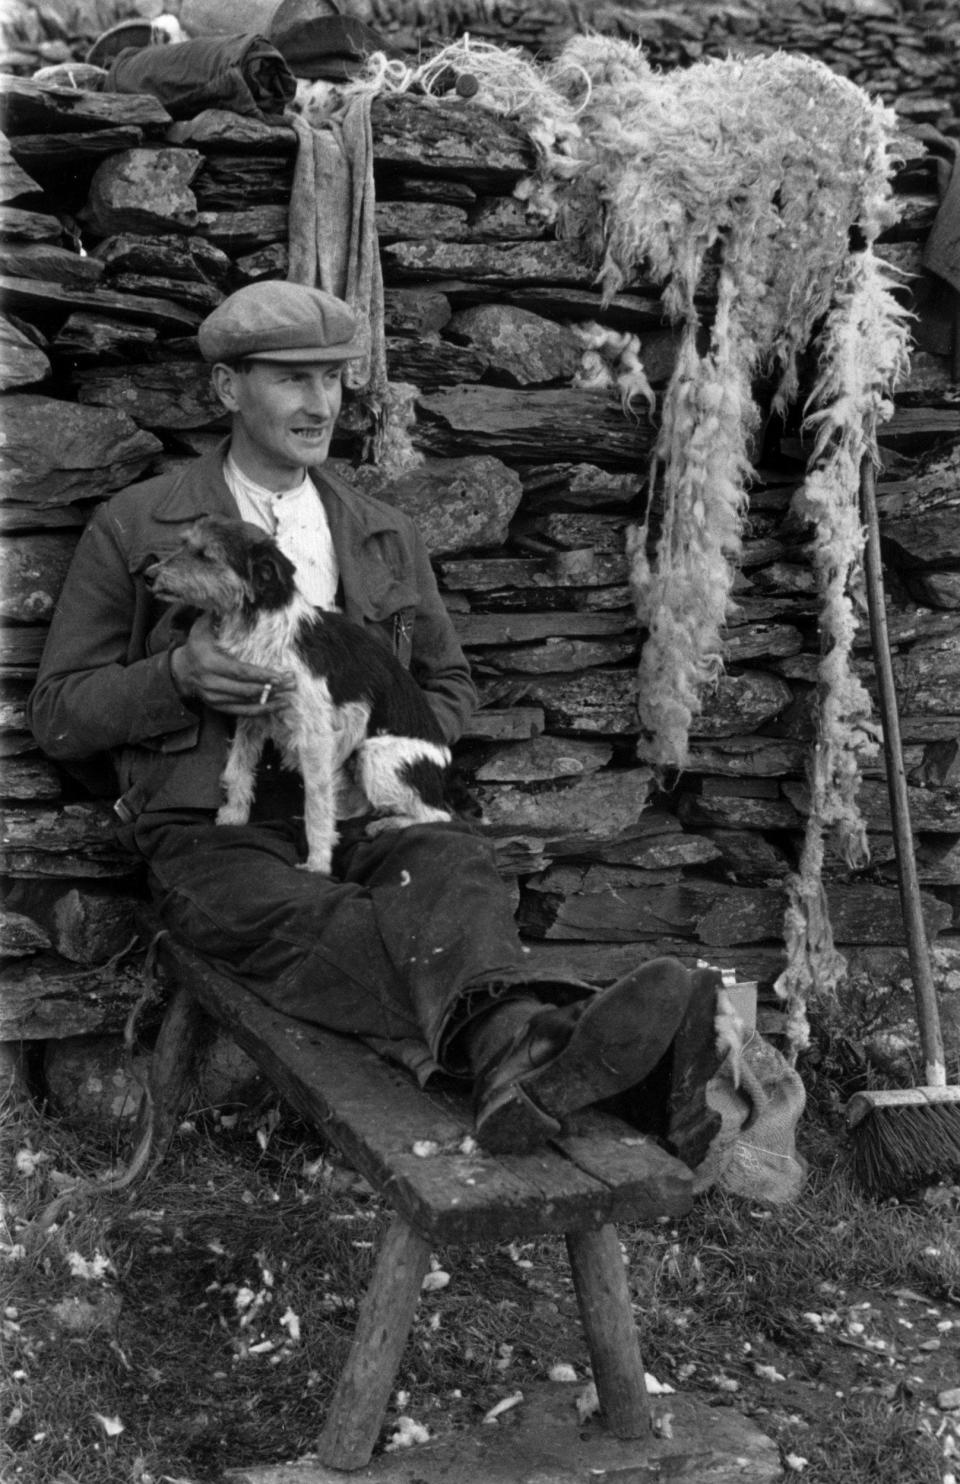 Welsh sheep shearer Pyrs Williams resting with his dog at Hafod-y-Llan in Snowdonia. From ‘Shearing Time In Snowdonia’, published in Picture Post, 1951  - Grace Robertson/Picture Post/Hulton Archive/Getty